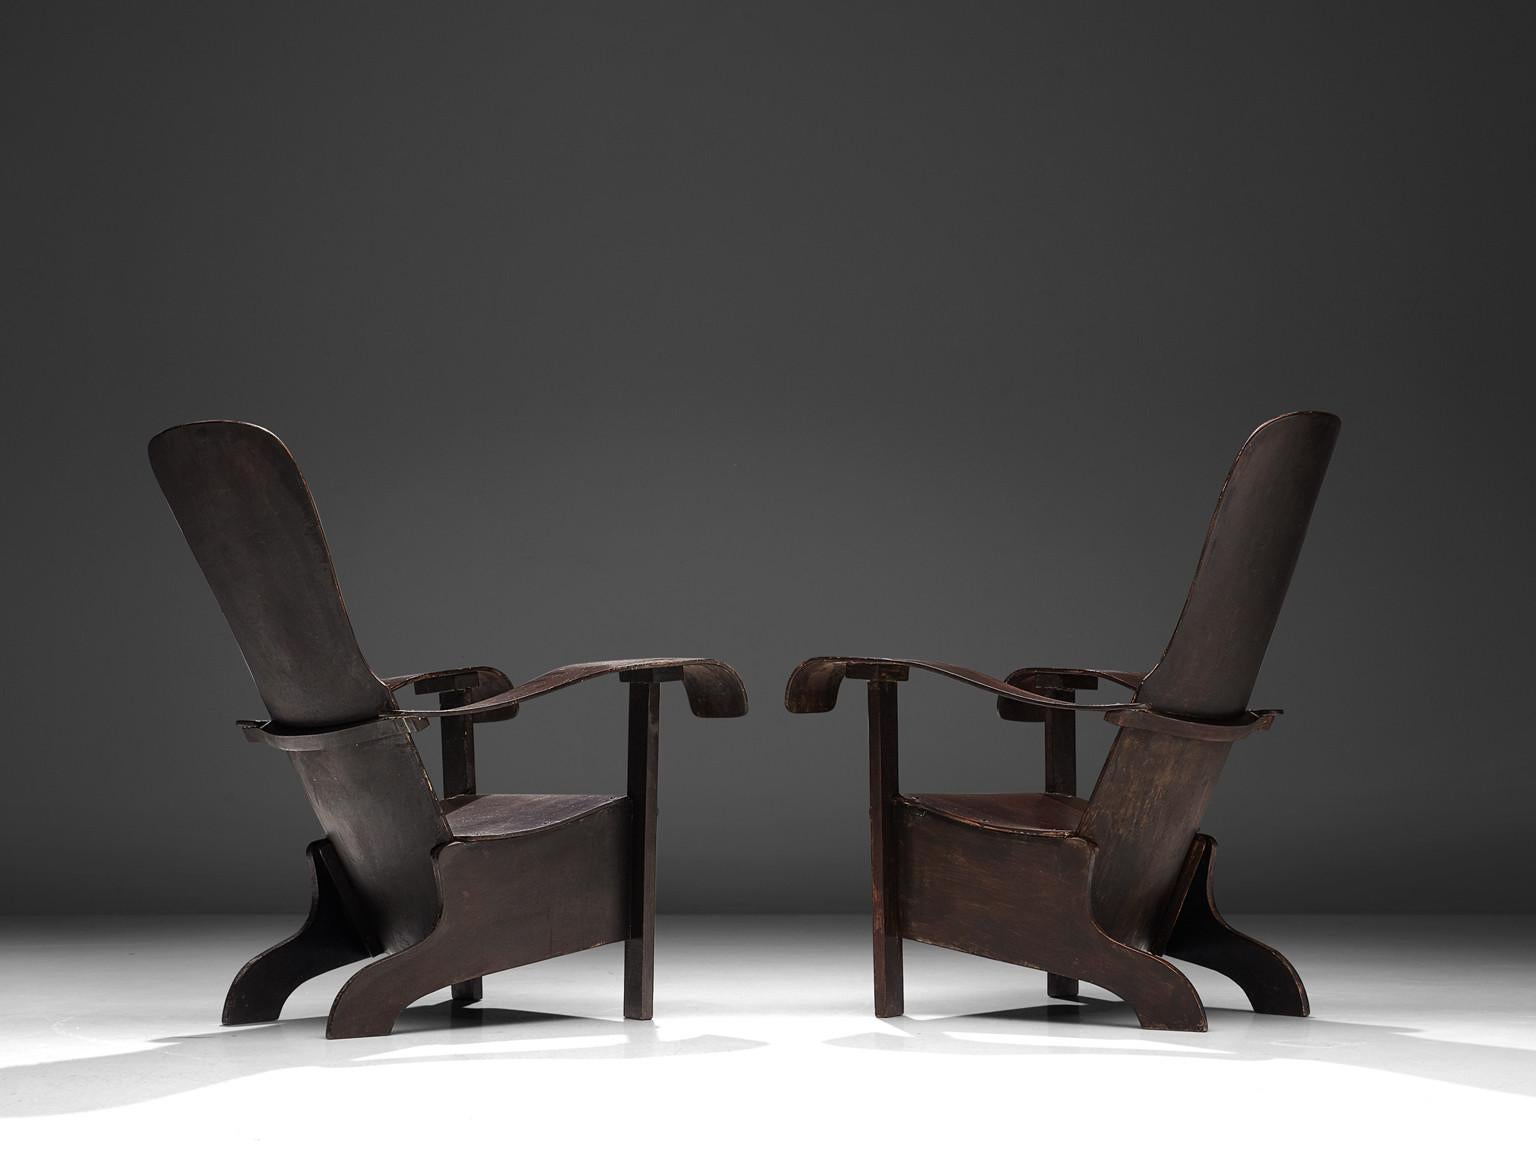 Móveis Cimo, pair of lounge chairs, laminated wood, Brazil, 1940s

Well-sculpted Brazilian lounge chairs that deserve a prominent place in one's interior. The construction is based on rounded angles and curvaceous lines, made possible by the